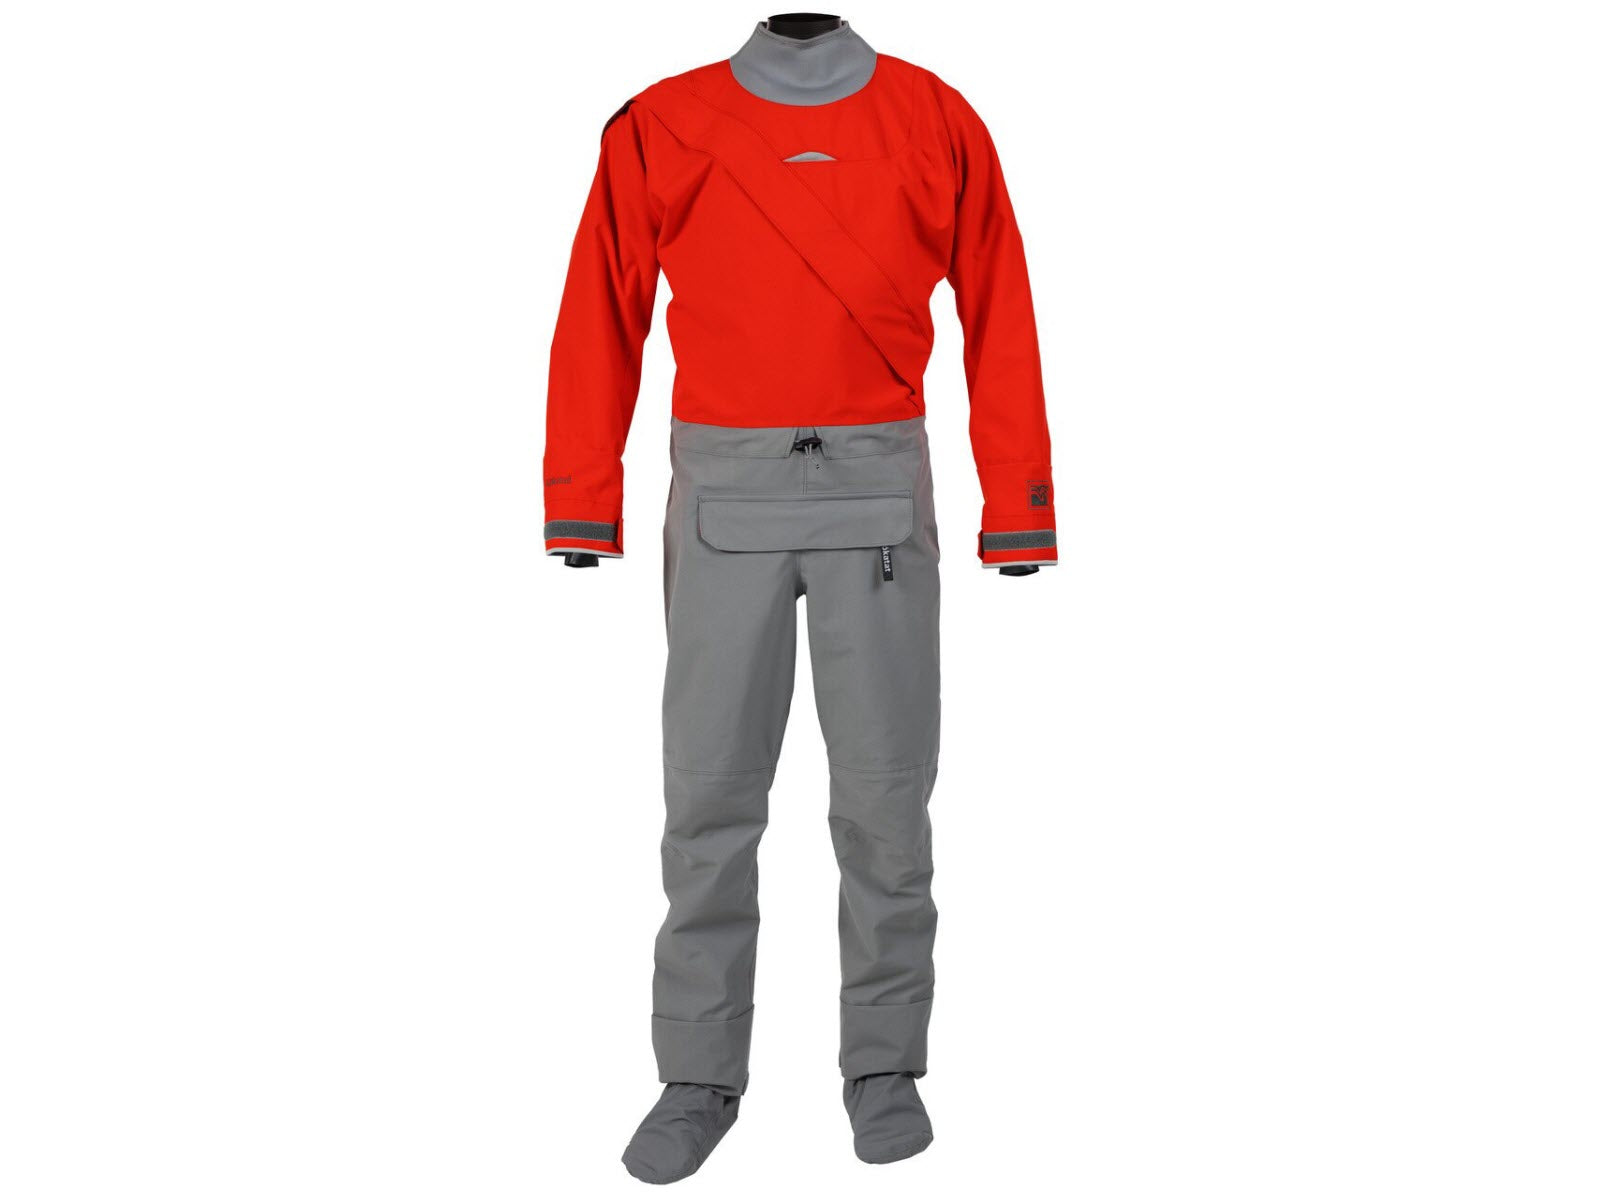 Kokatat GORE-TEX Pro Legacy Front Entry Men's Dry Suit in Red